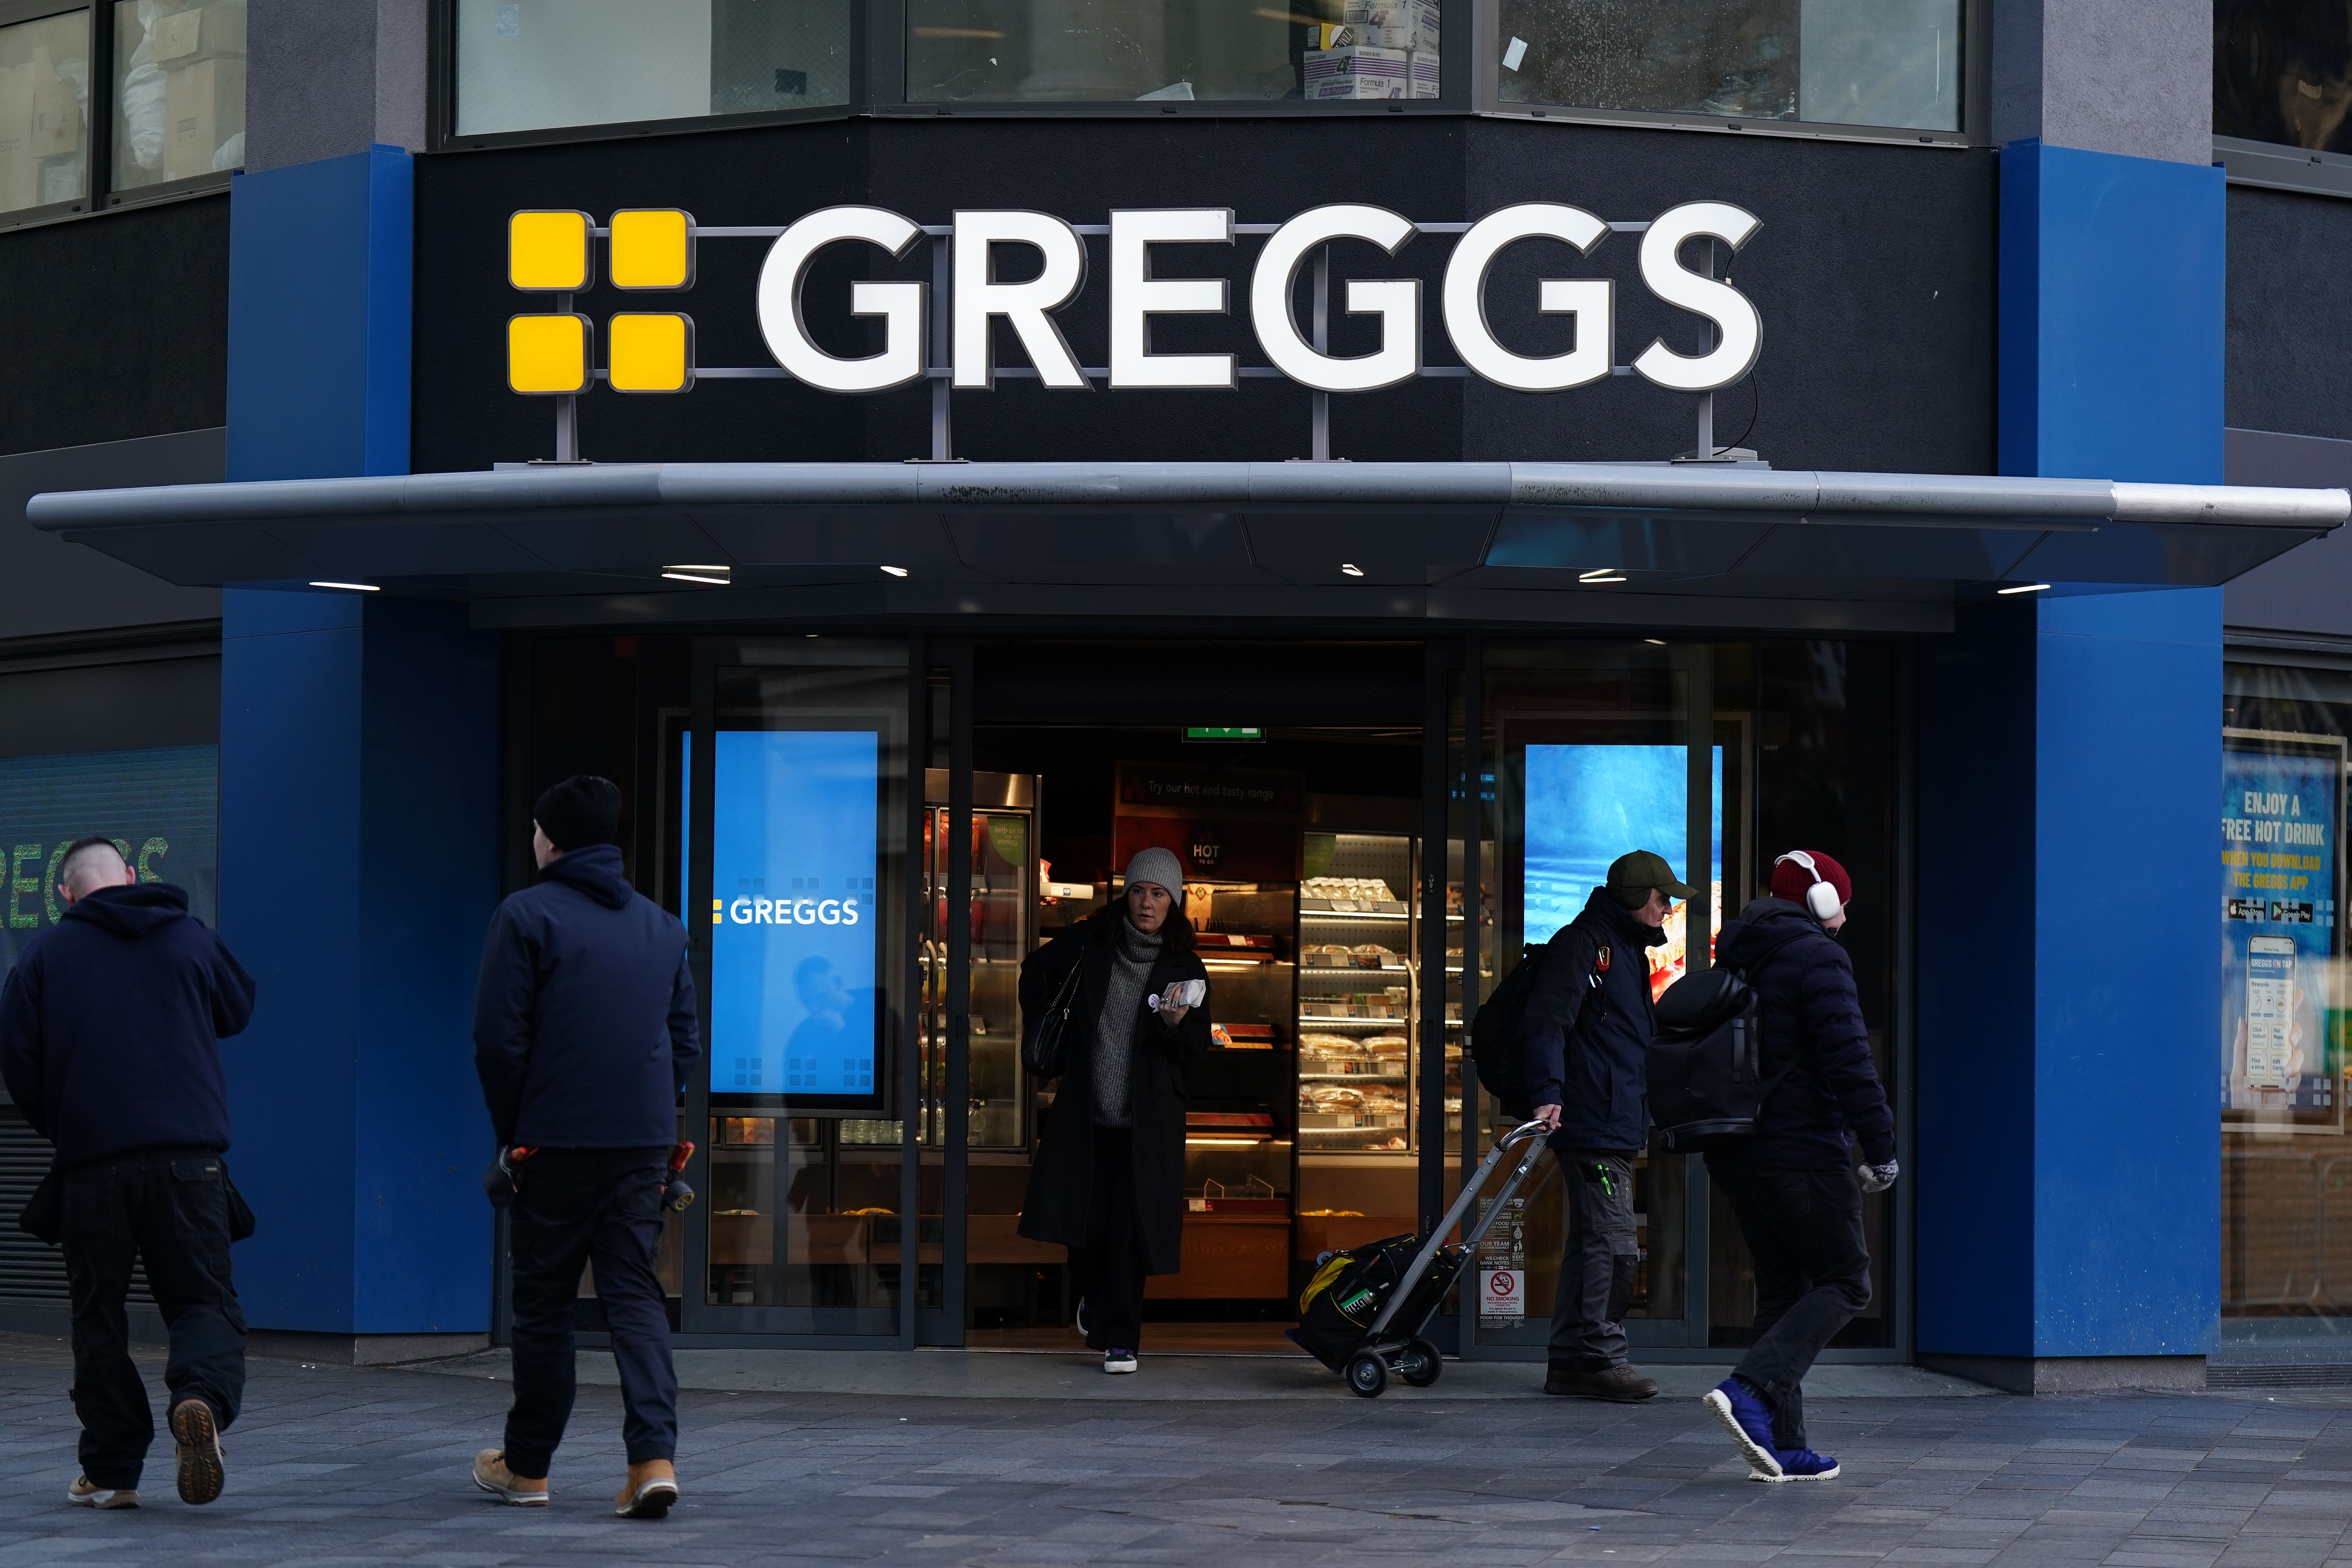 Greggs stores were forced to close due to something slightly more severe than an ‘issue’